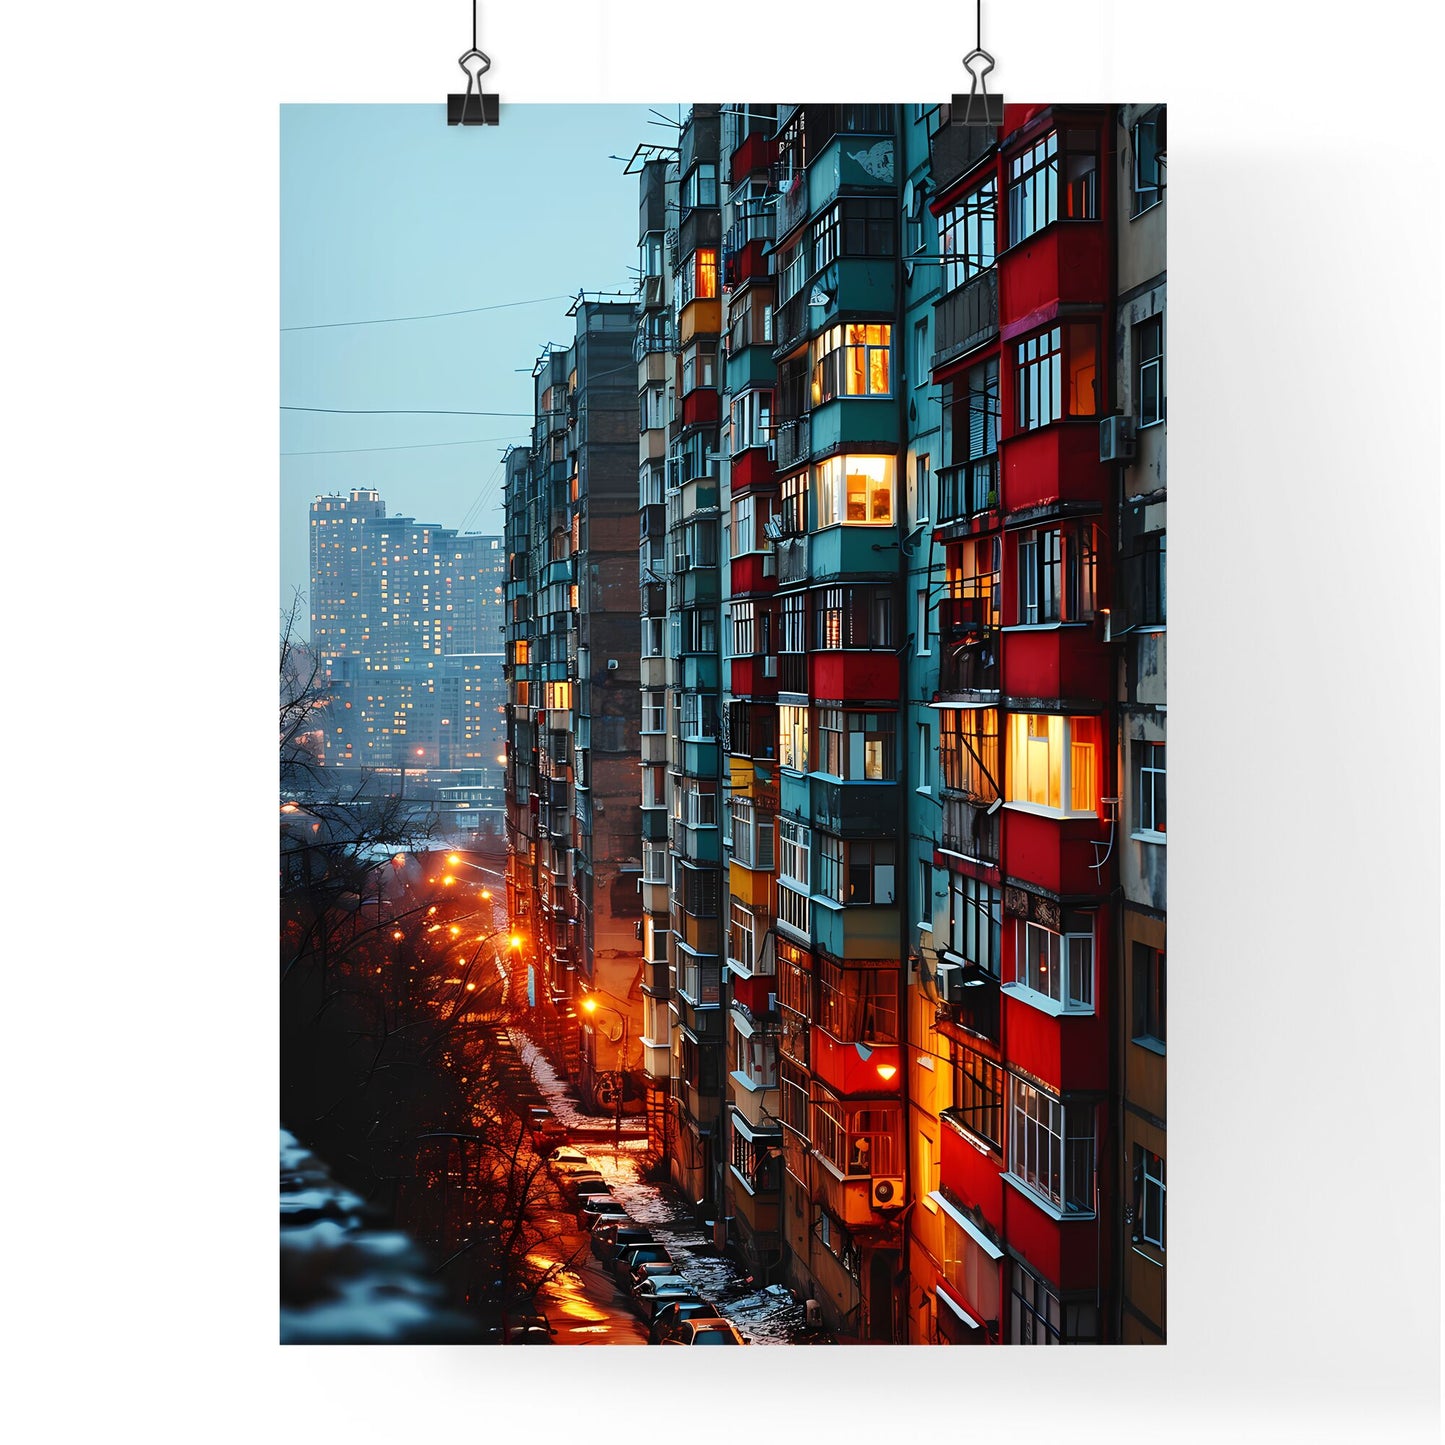 A Poster of a straight facade of a big aparment block building - A Multi-Story Building With Many Windows Default Title